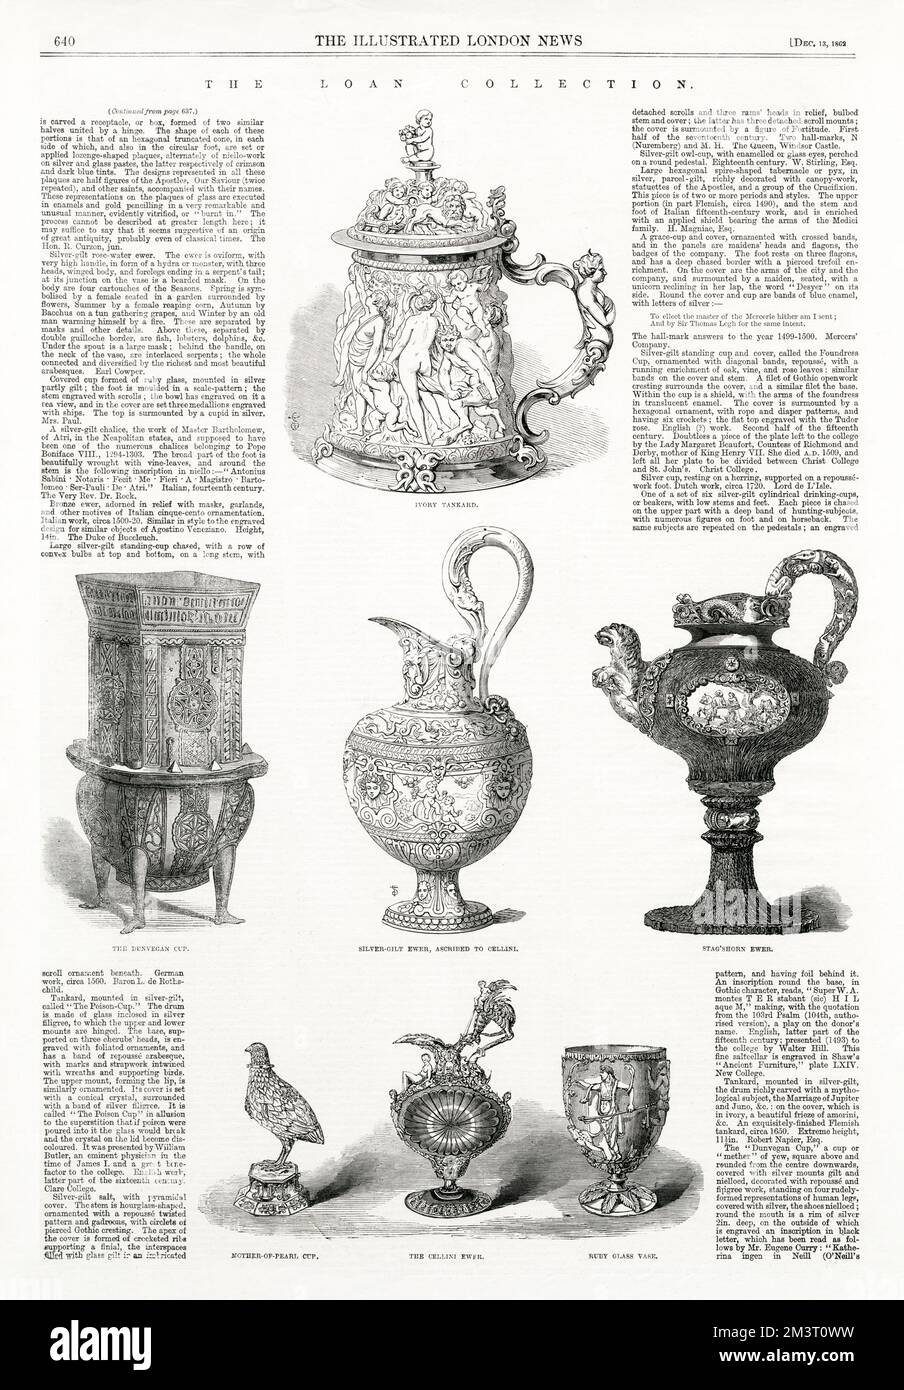 The Loan Collection Exhibition - South Kensington: (left to right from top) Ivory Tankard, The Dunvegan Cup, Silver-gilt Ewer (ascribed to Cellini), Stag'shorn Ewer, Mother-of-pearl Cup, The Cellini Ewer and Ruby Glass Vase. Stock Photo